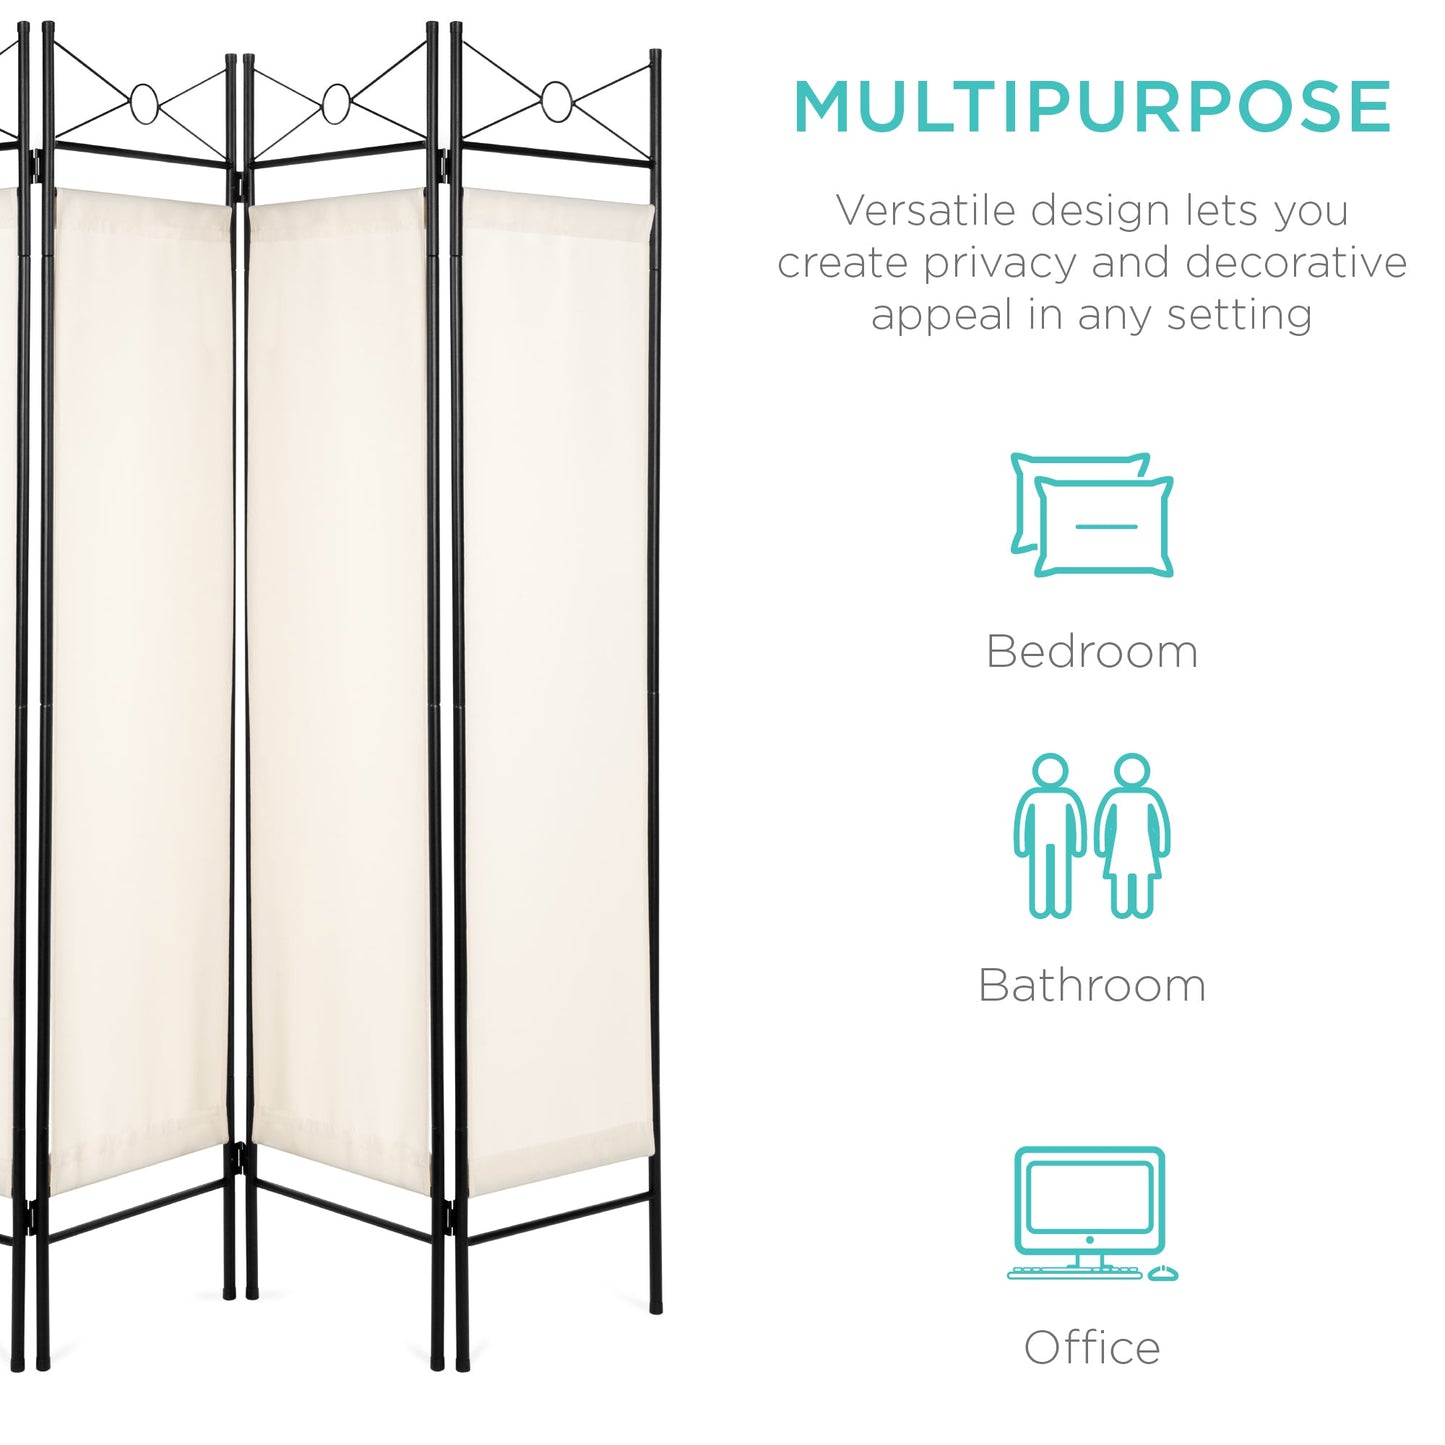 4-Panel Folding Privacy Screen Room Divider Decoration Accent, 6ft